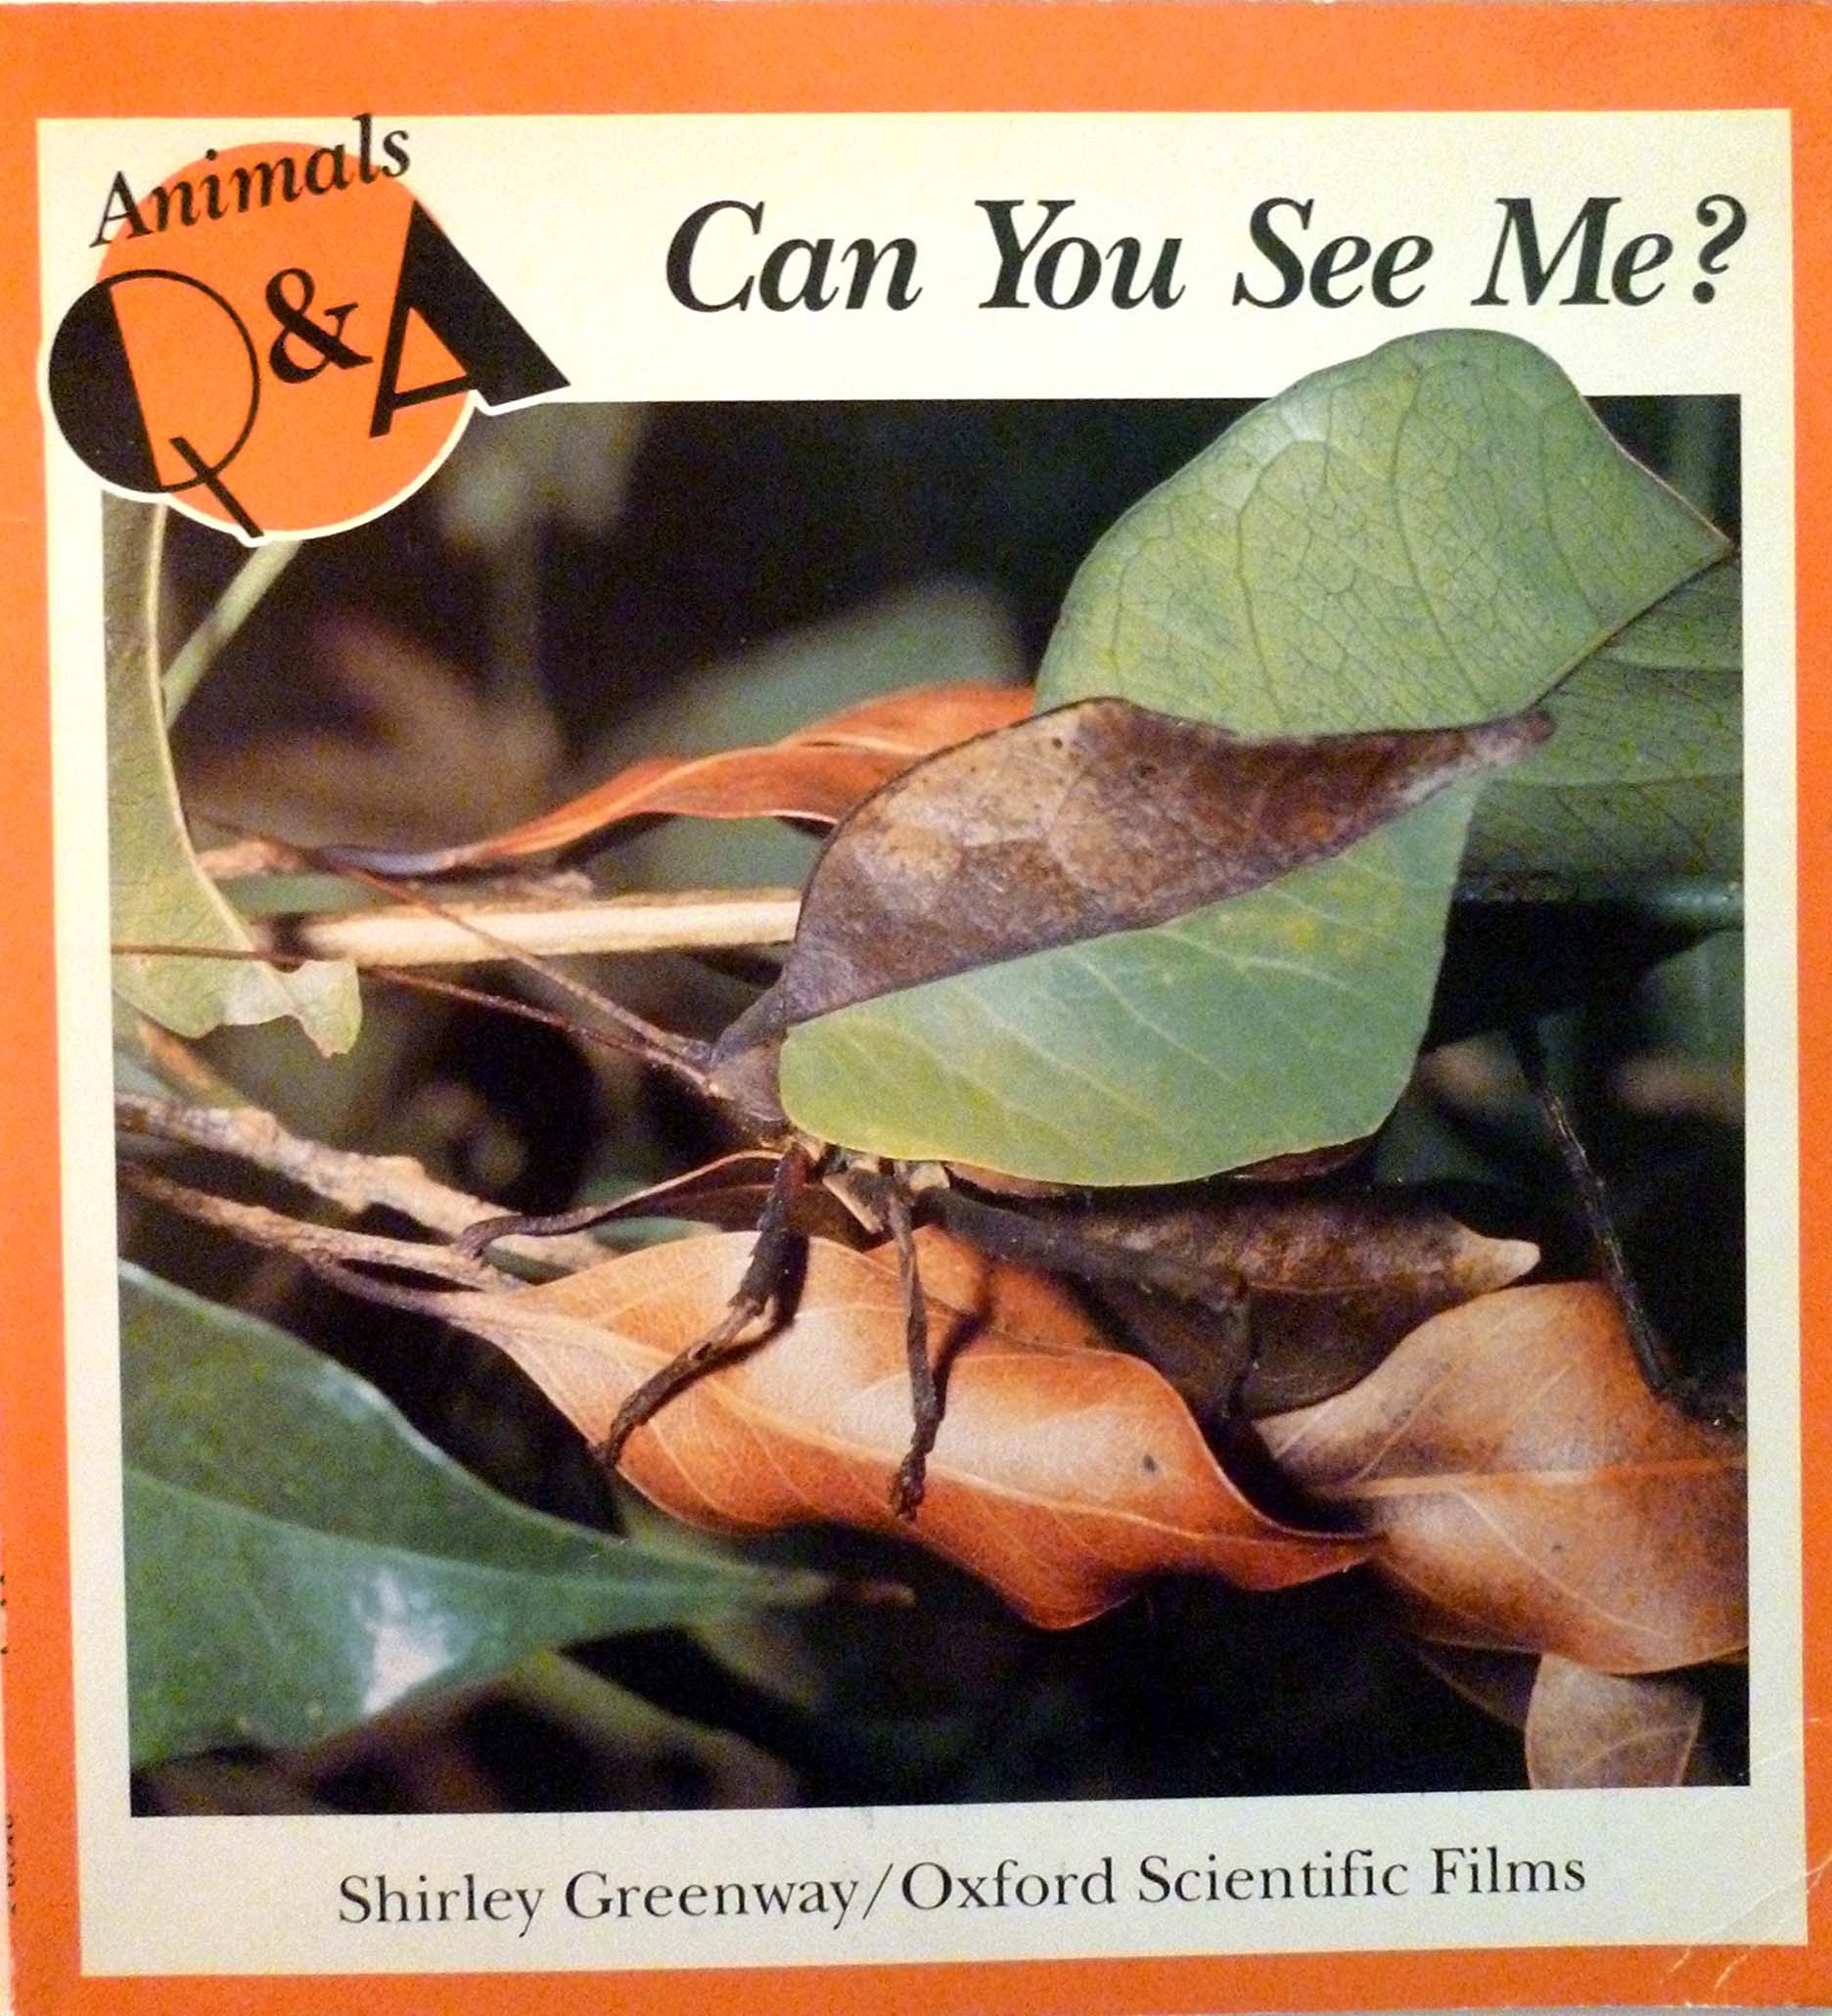 Can you see me? magazine reviews